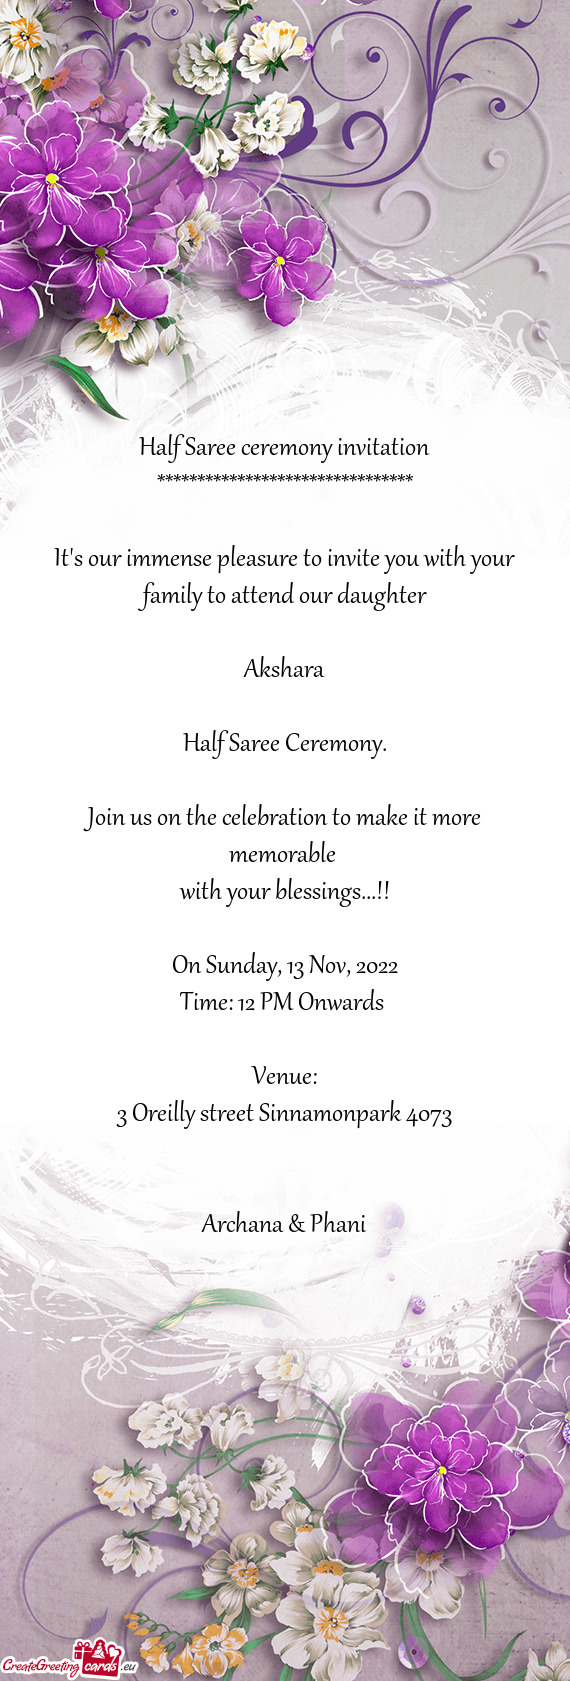 Join us on the celebration to make it more memorable